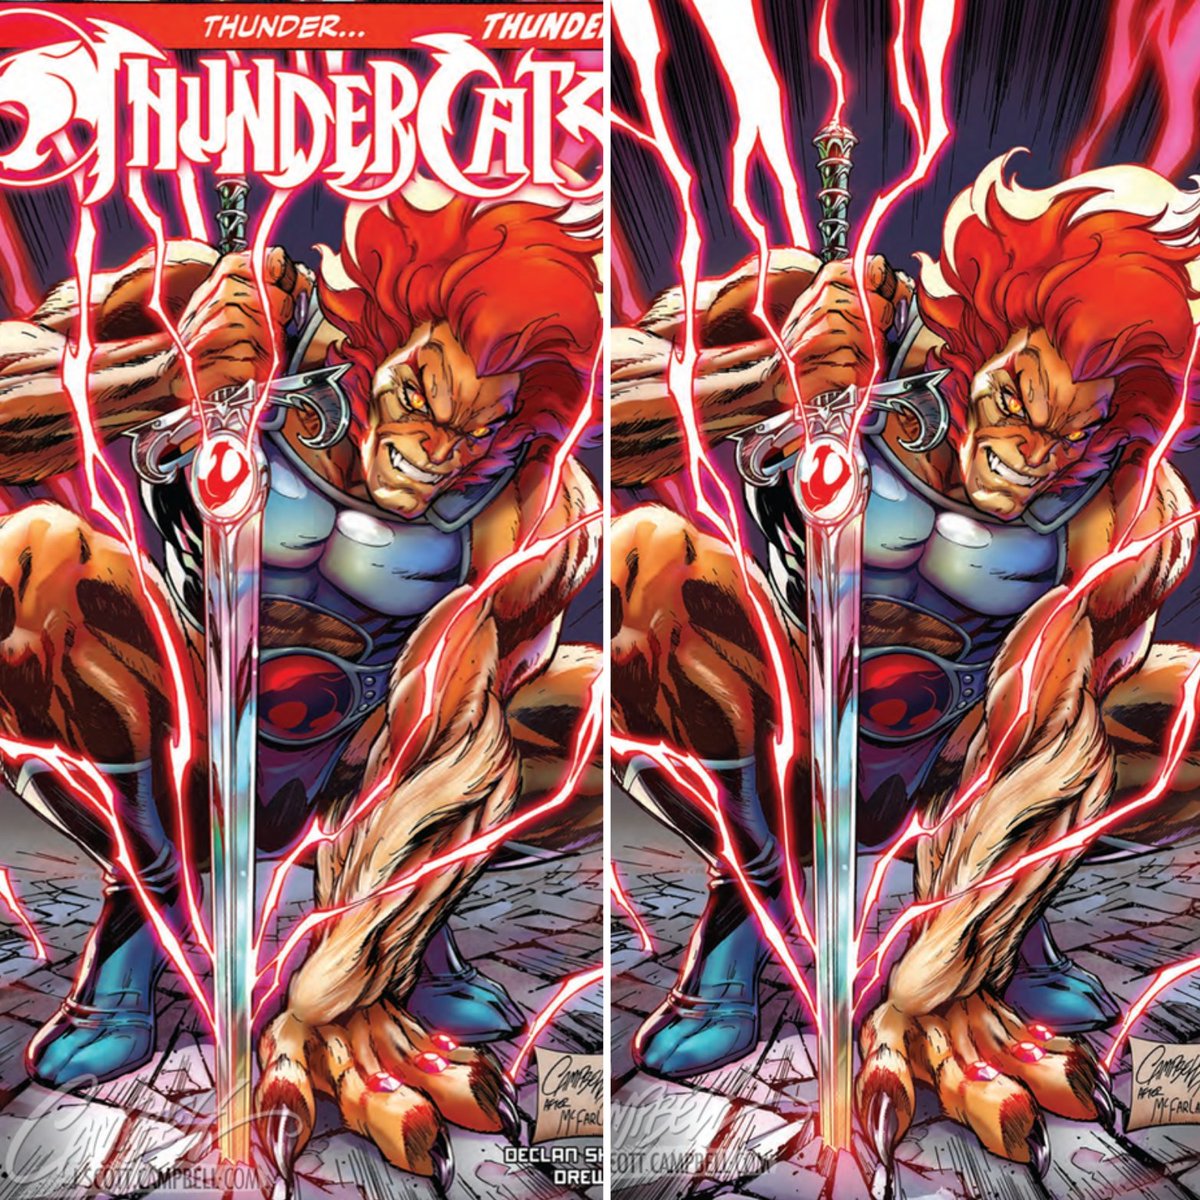 :: Hoooo! :: I just successfully ordered the @jsc_store variant cover of #ThunderCats No. 4 with art by @JScottCampbell and colors by @TanyaLehoux.